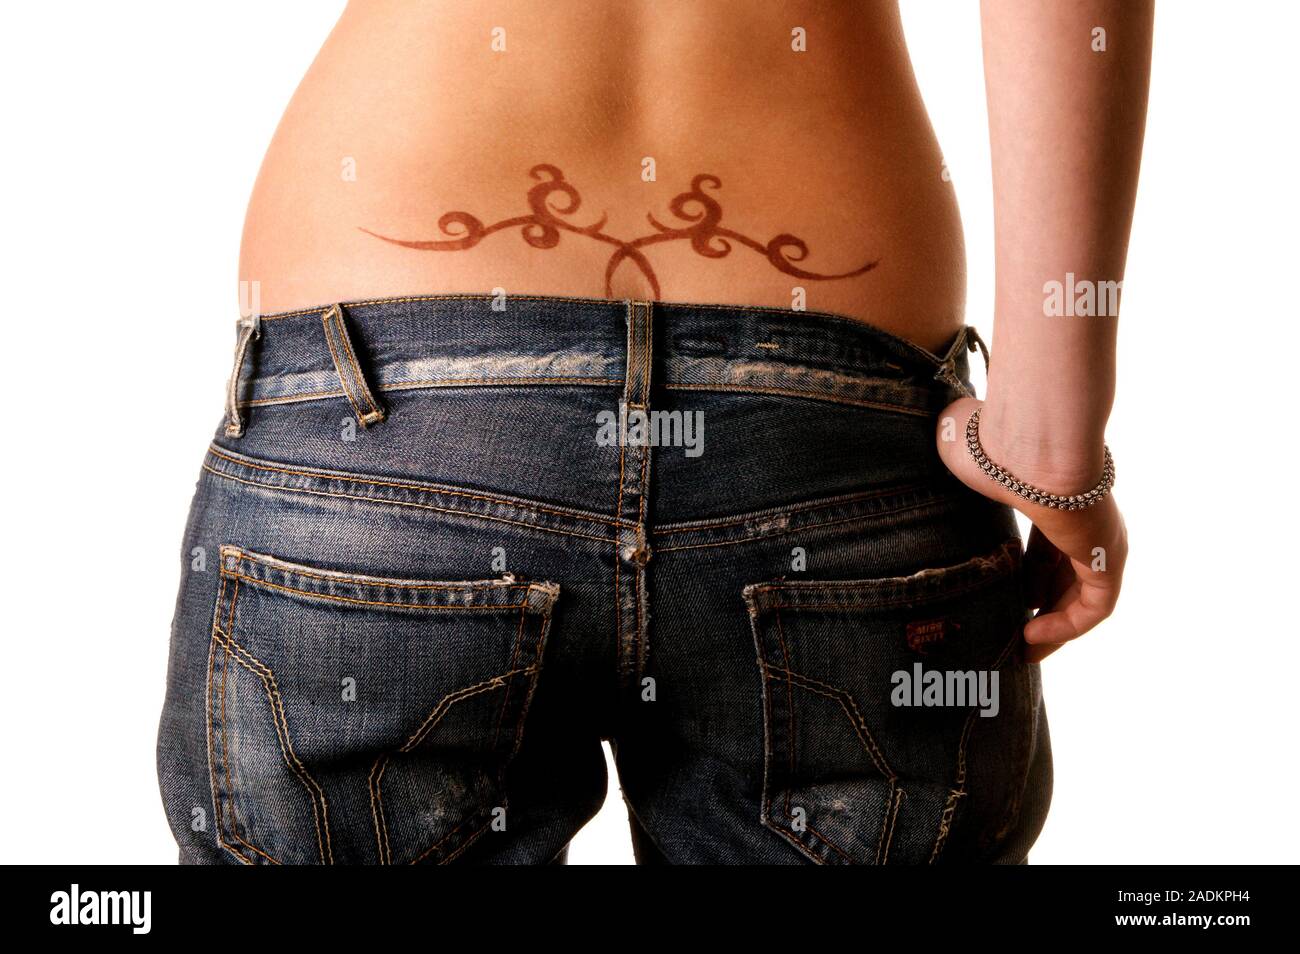 Lower Back Tattoos for Girls - Thoughtful Tattoos